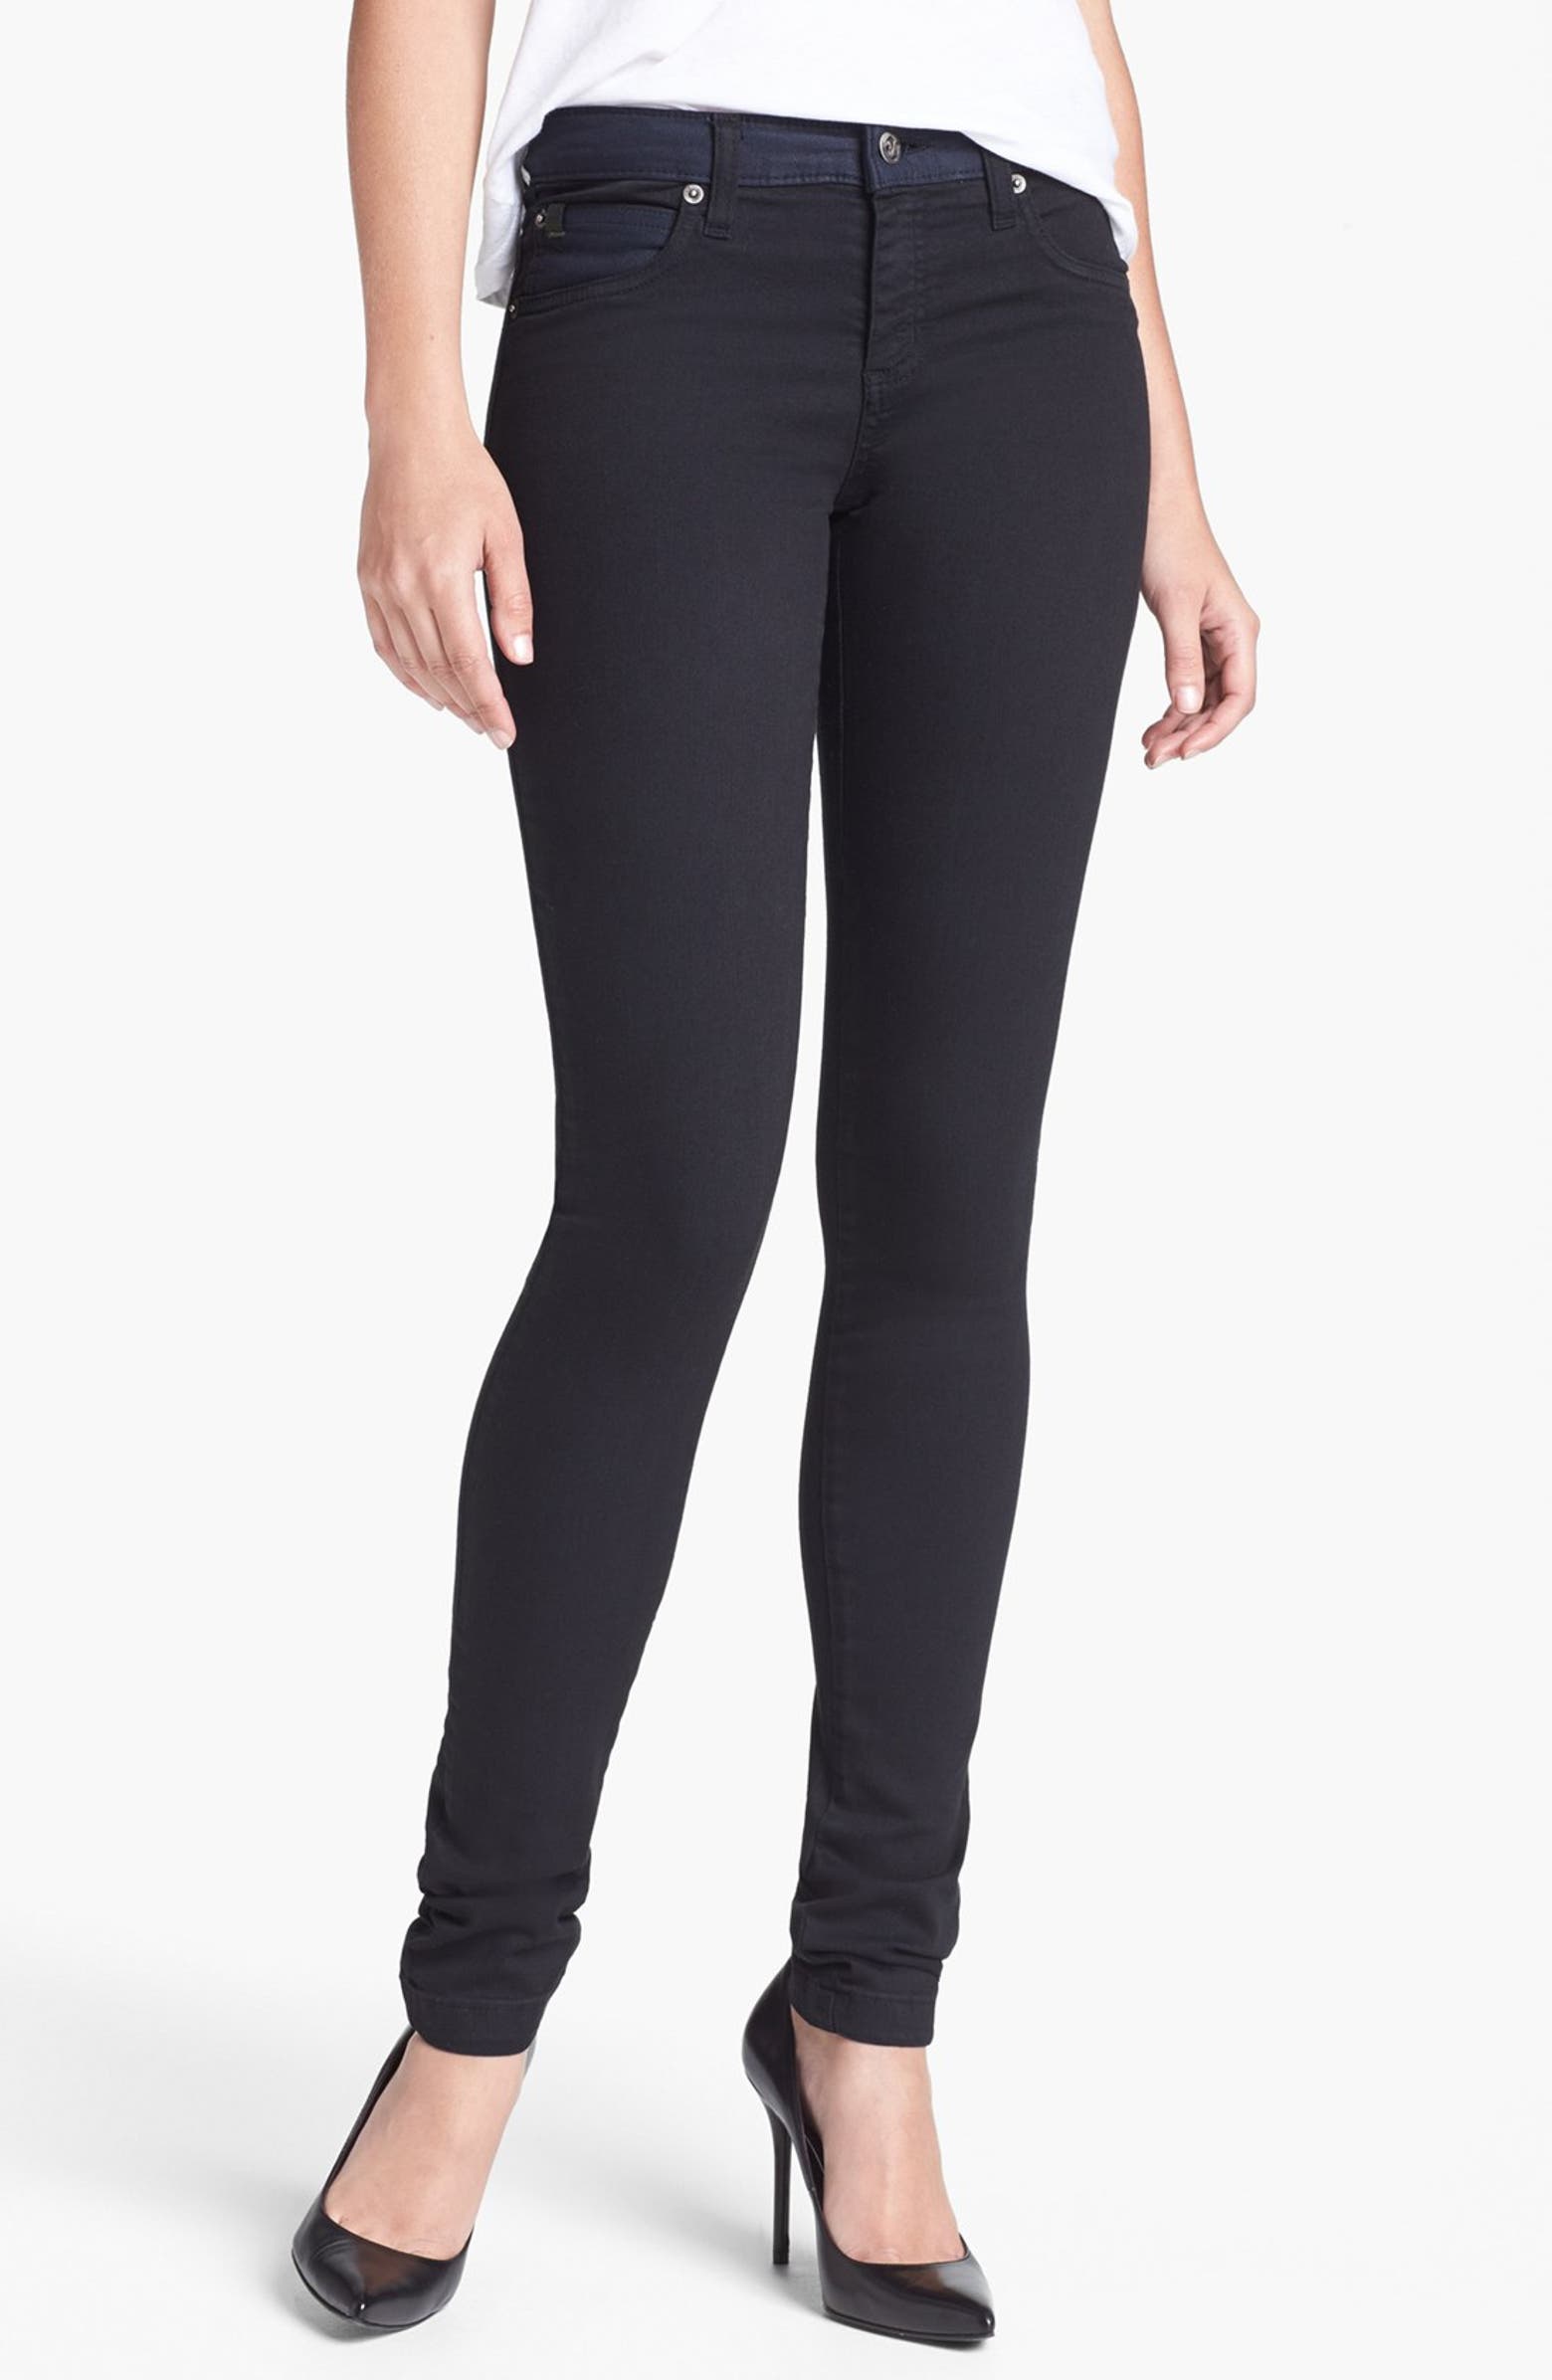 Yoga Jeans by Second Denim High Rise Colorblock Skinny Jeans | Nordstrom